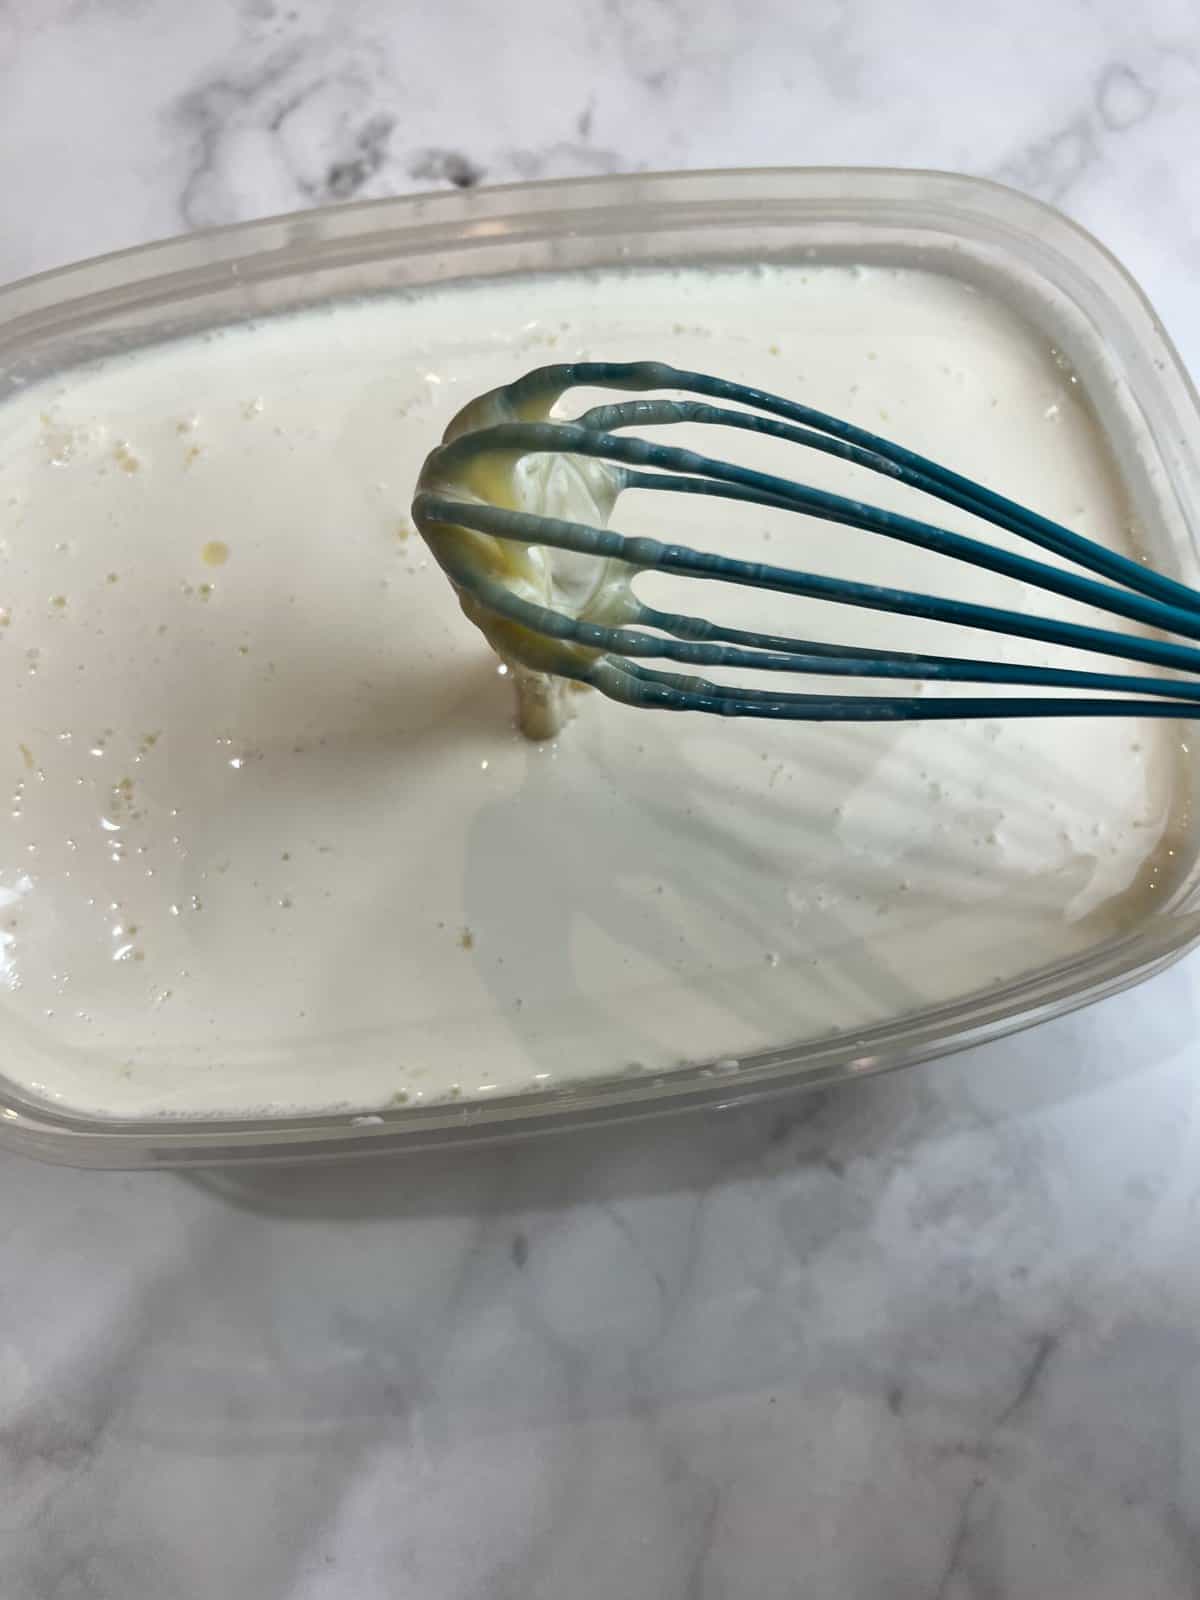 A white countertop with a tupperware container filled with all of the liquid ingredients for kulfi being mixed together with a blue whisk.